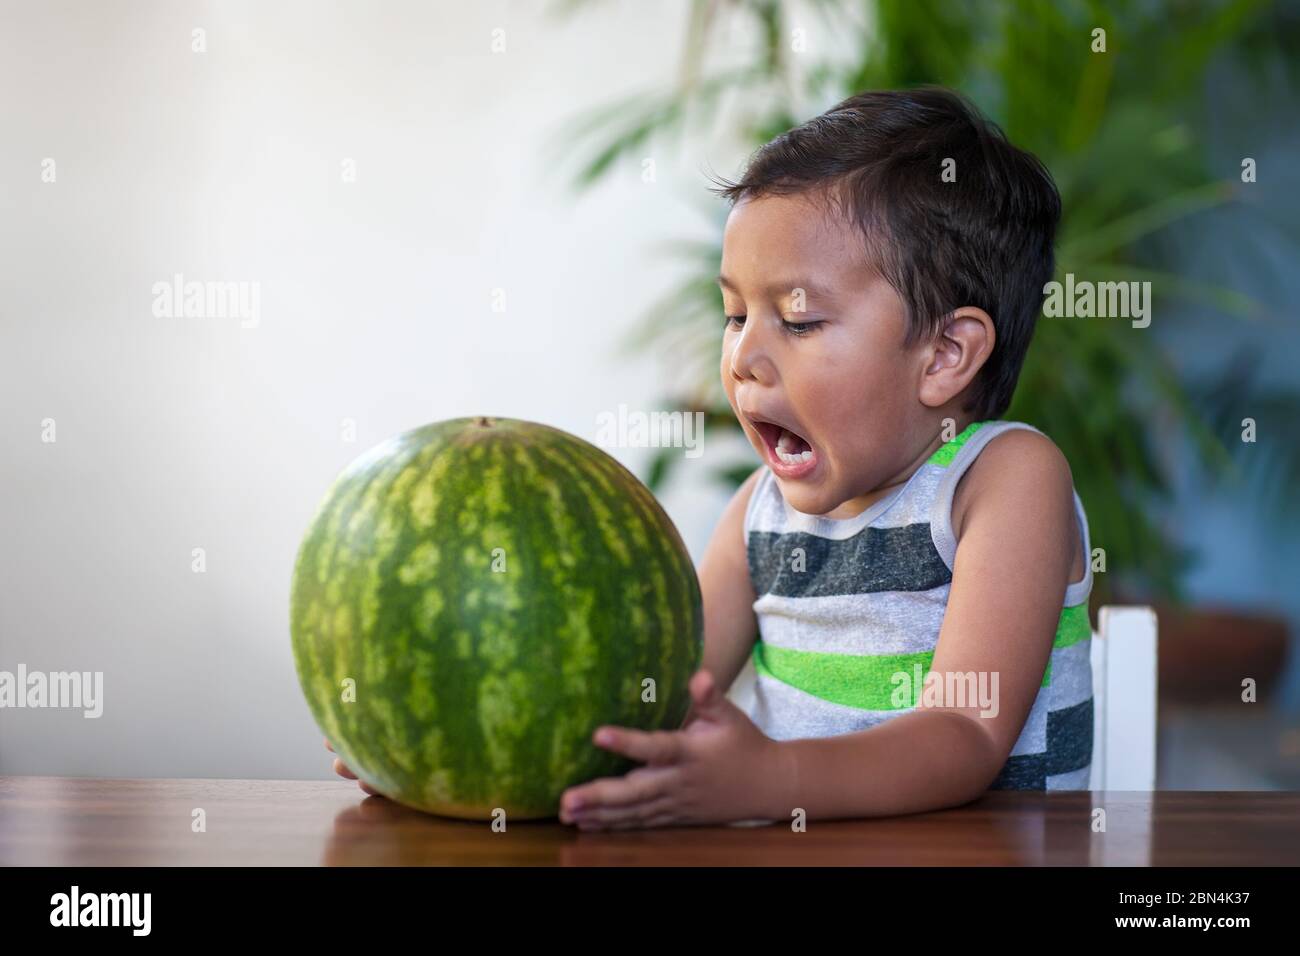 A toddler holding a ripe watermelon who is eager to bite into the low-calorie fruit during summer. Stock Photo